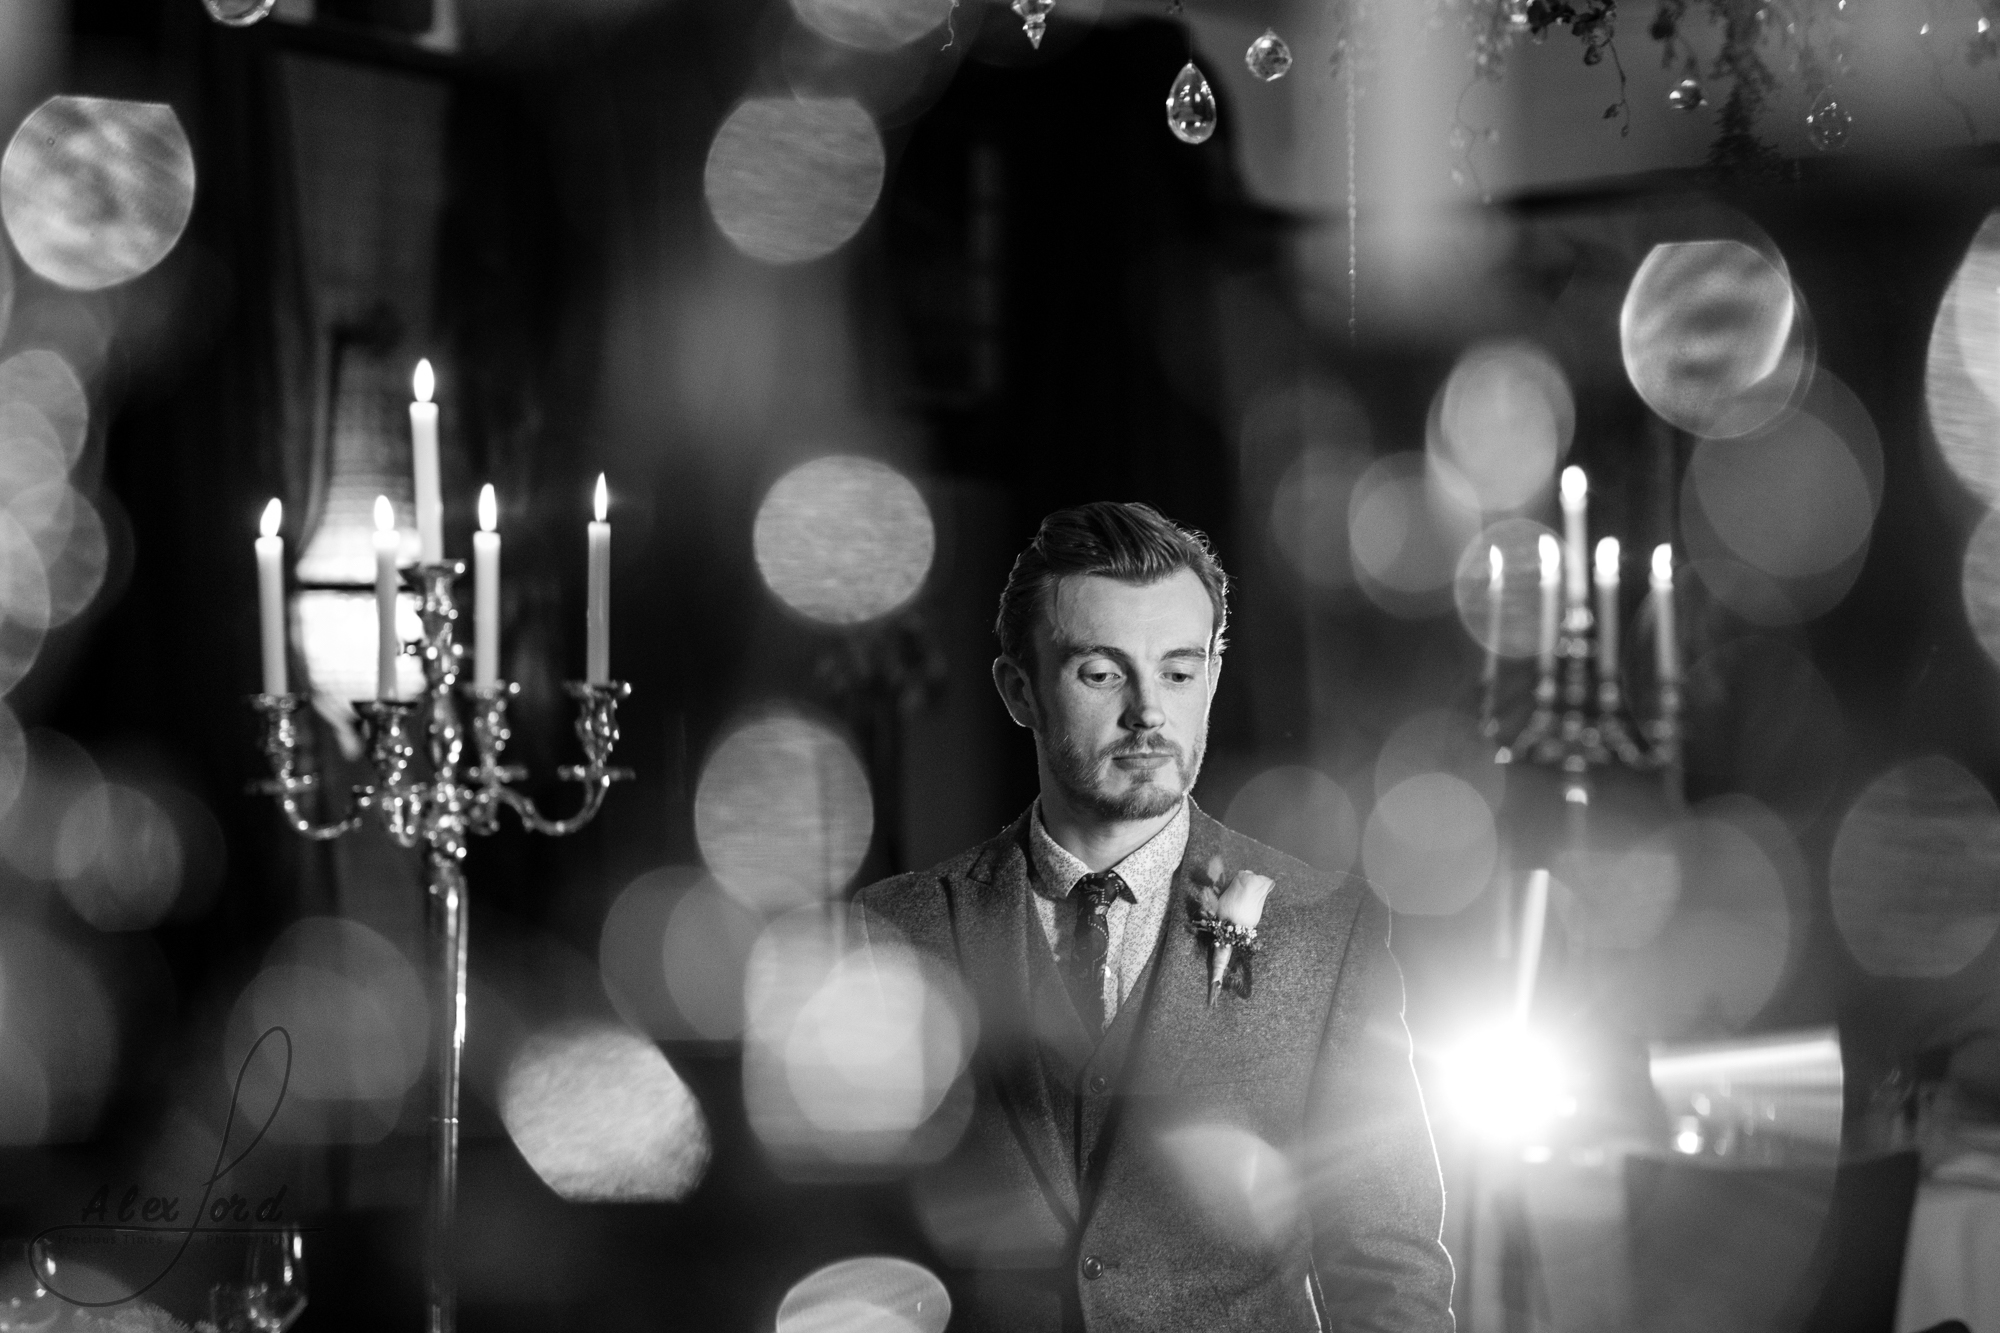 a black and white image of the groom inside the wedding venue lit up with candles